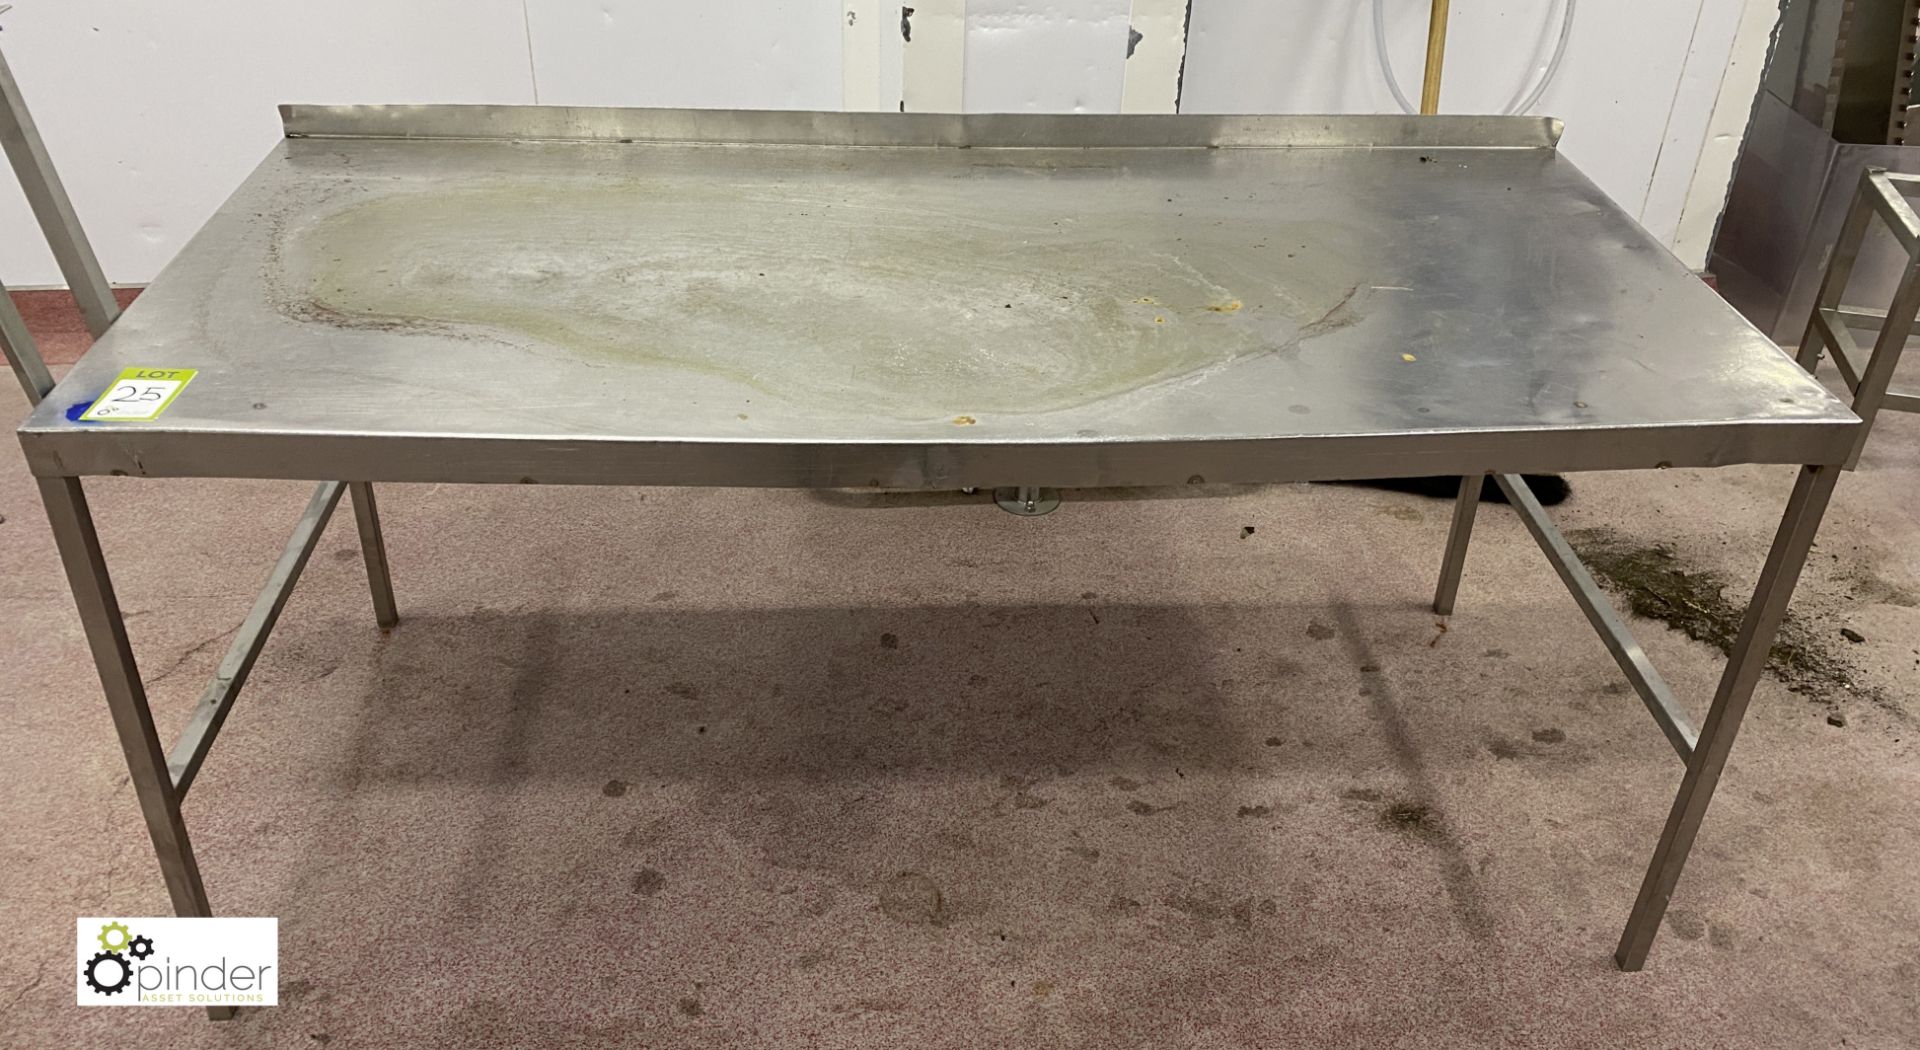 Stainless steel Preparation Table, 1720mm x 760mm x 790mm (please note there is a lift out fee of £5 - Image 2 of 3